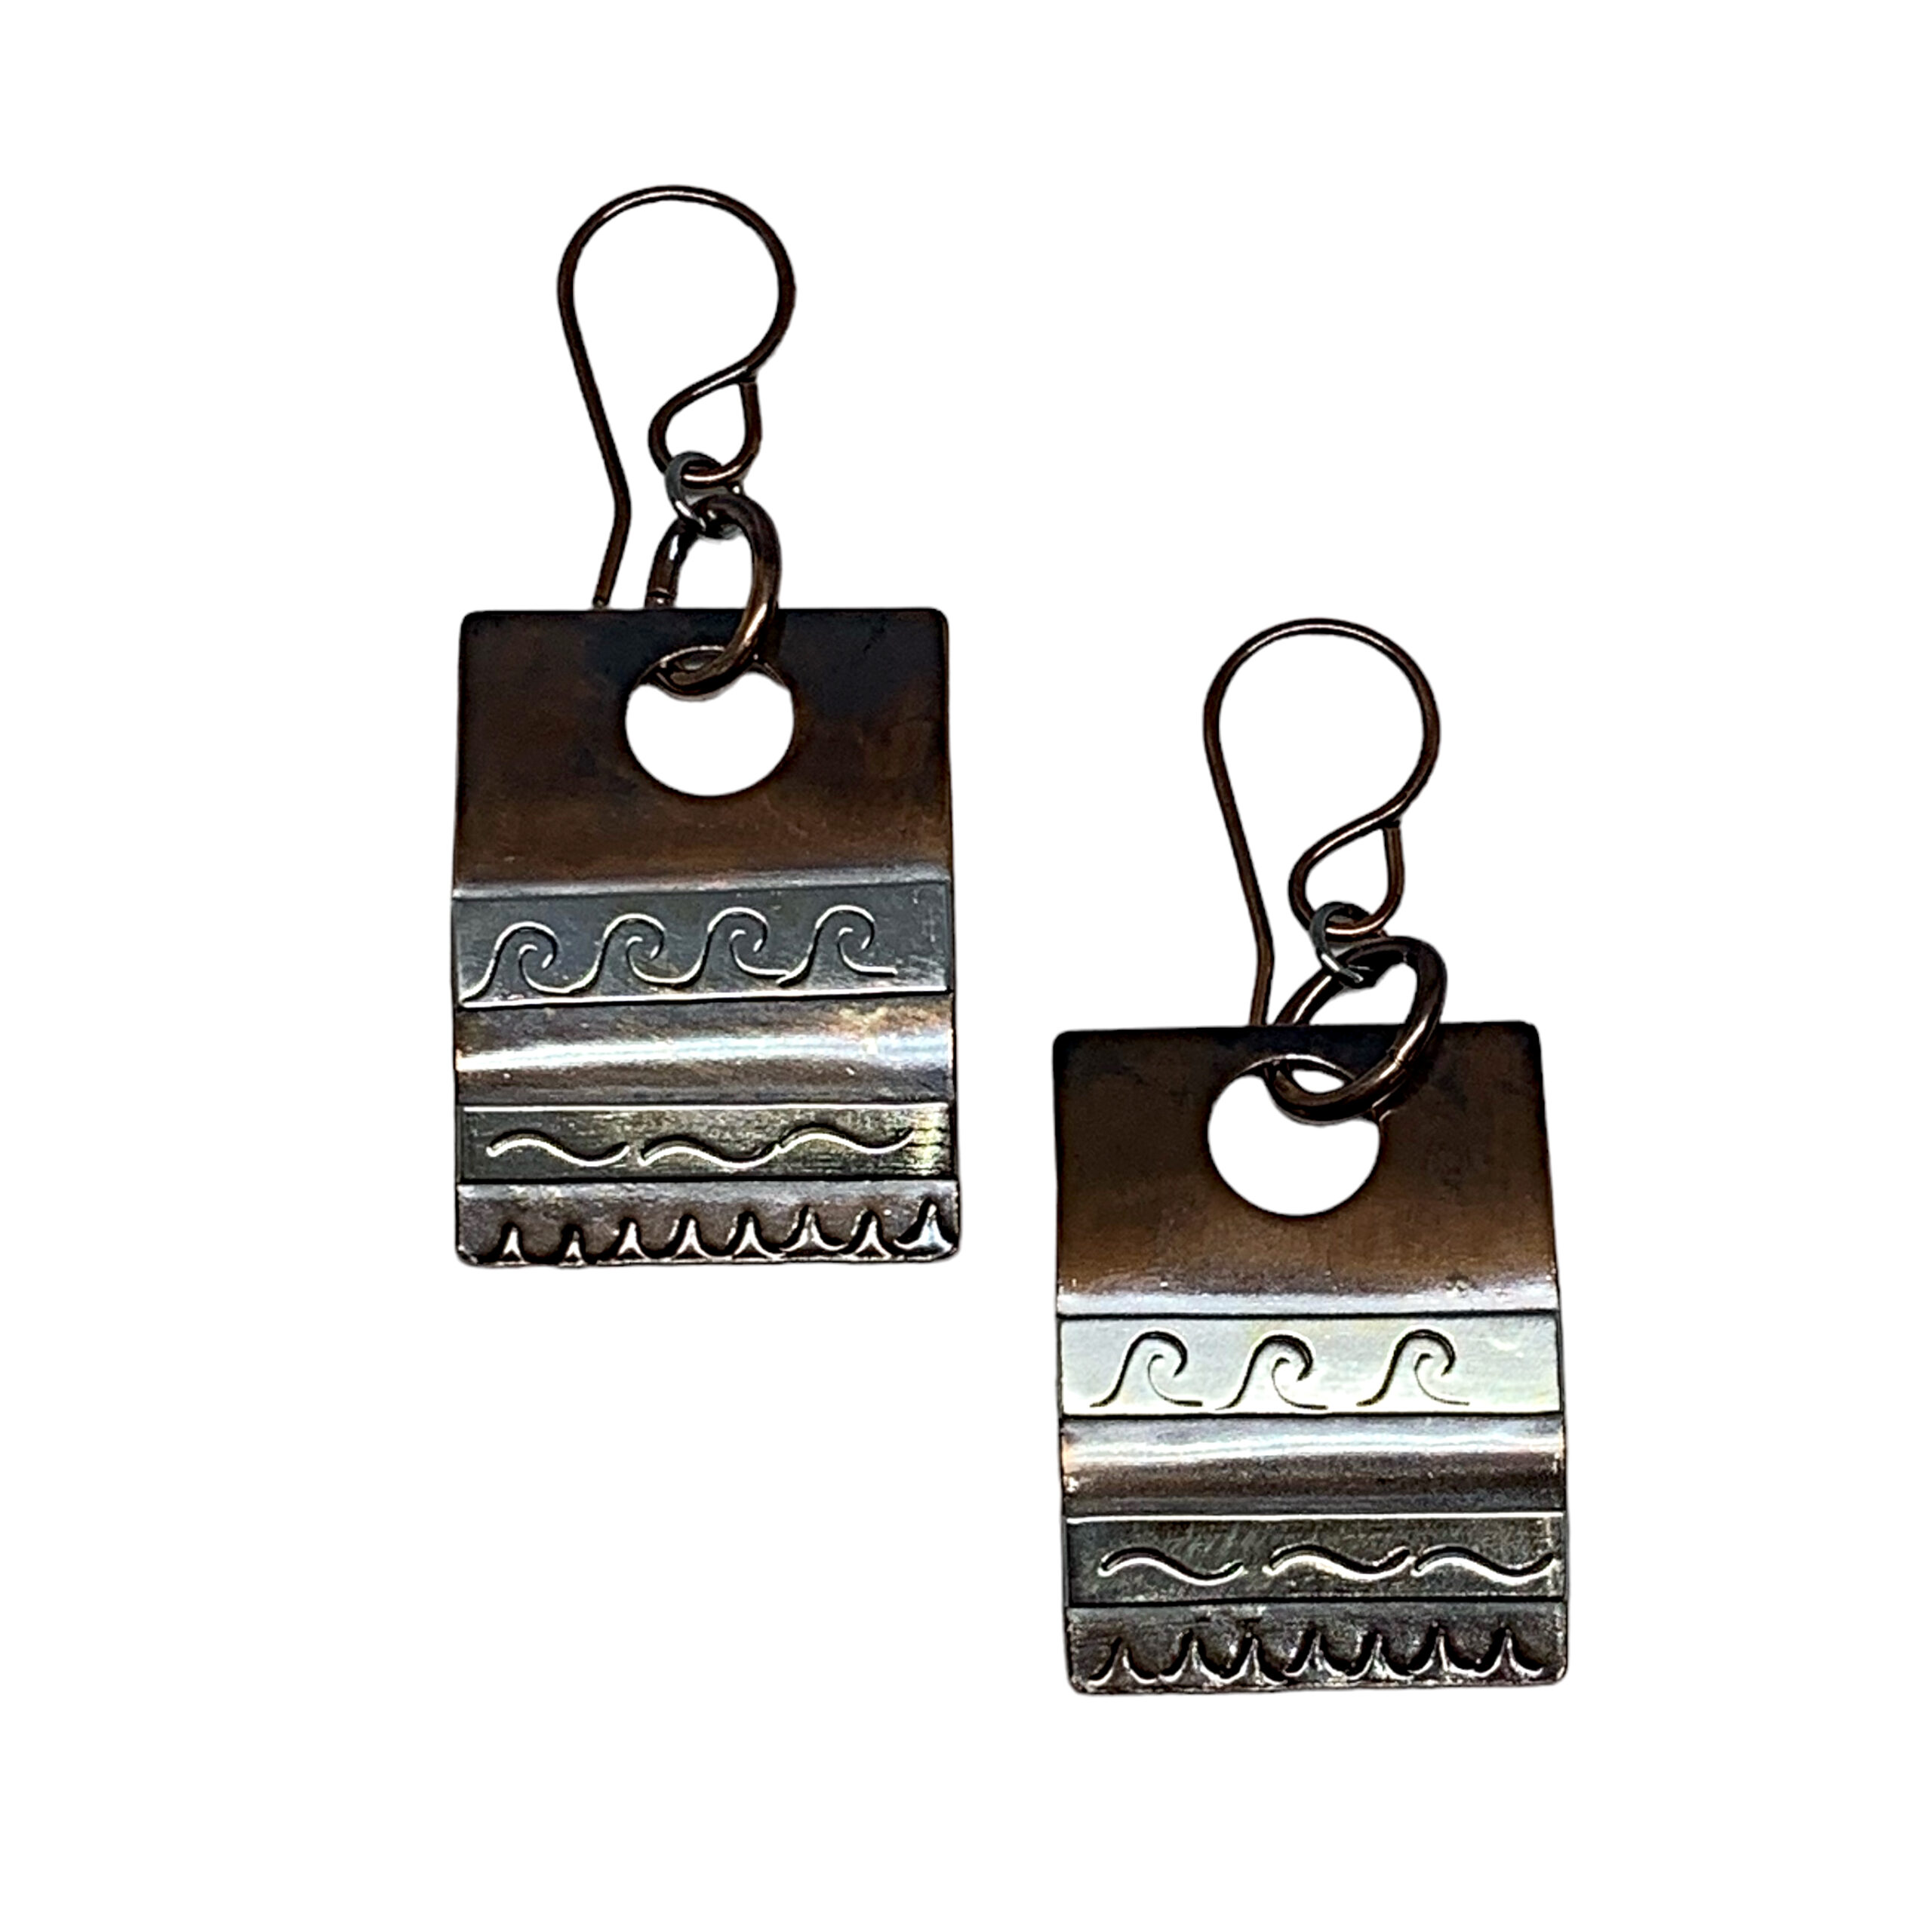 Handmade silver + copper earrings by A&R Jewellery at Effusion Art Gallery in Invermere, BC.